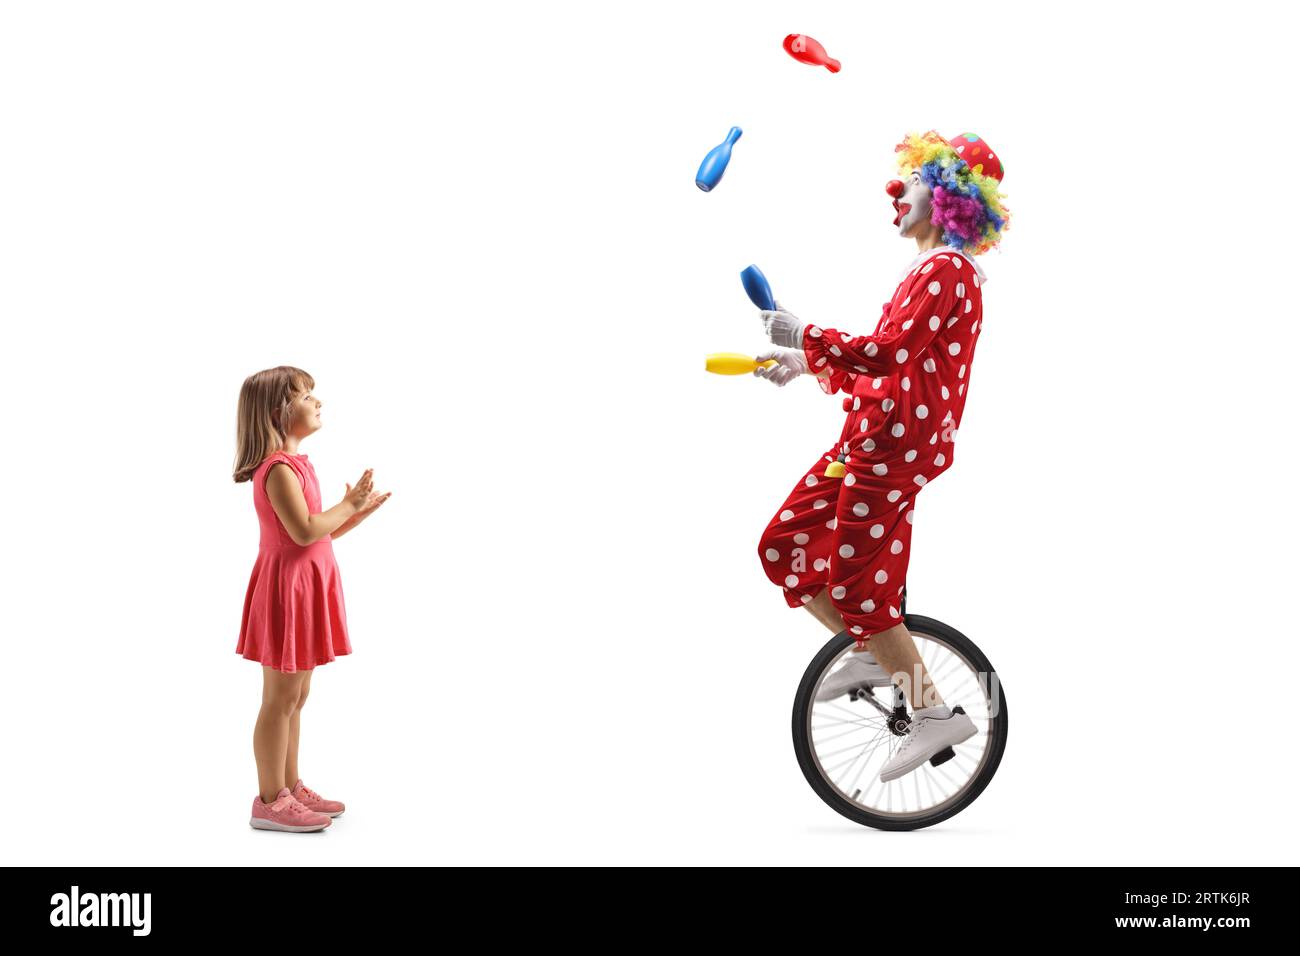 Little girl clapping and watching a clown riding a unicycle and juggling isolated on white background Stock Photo